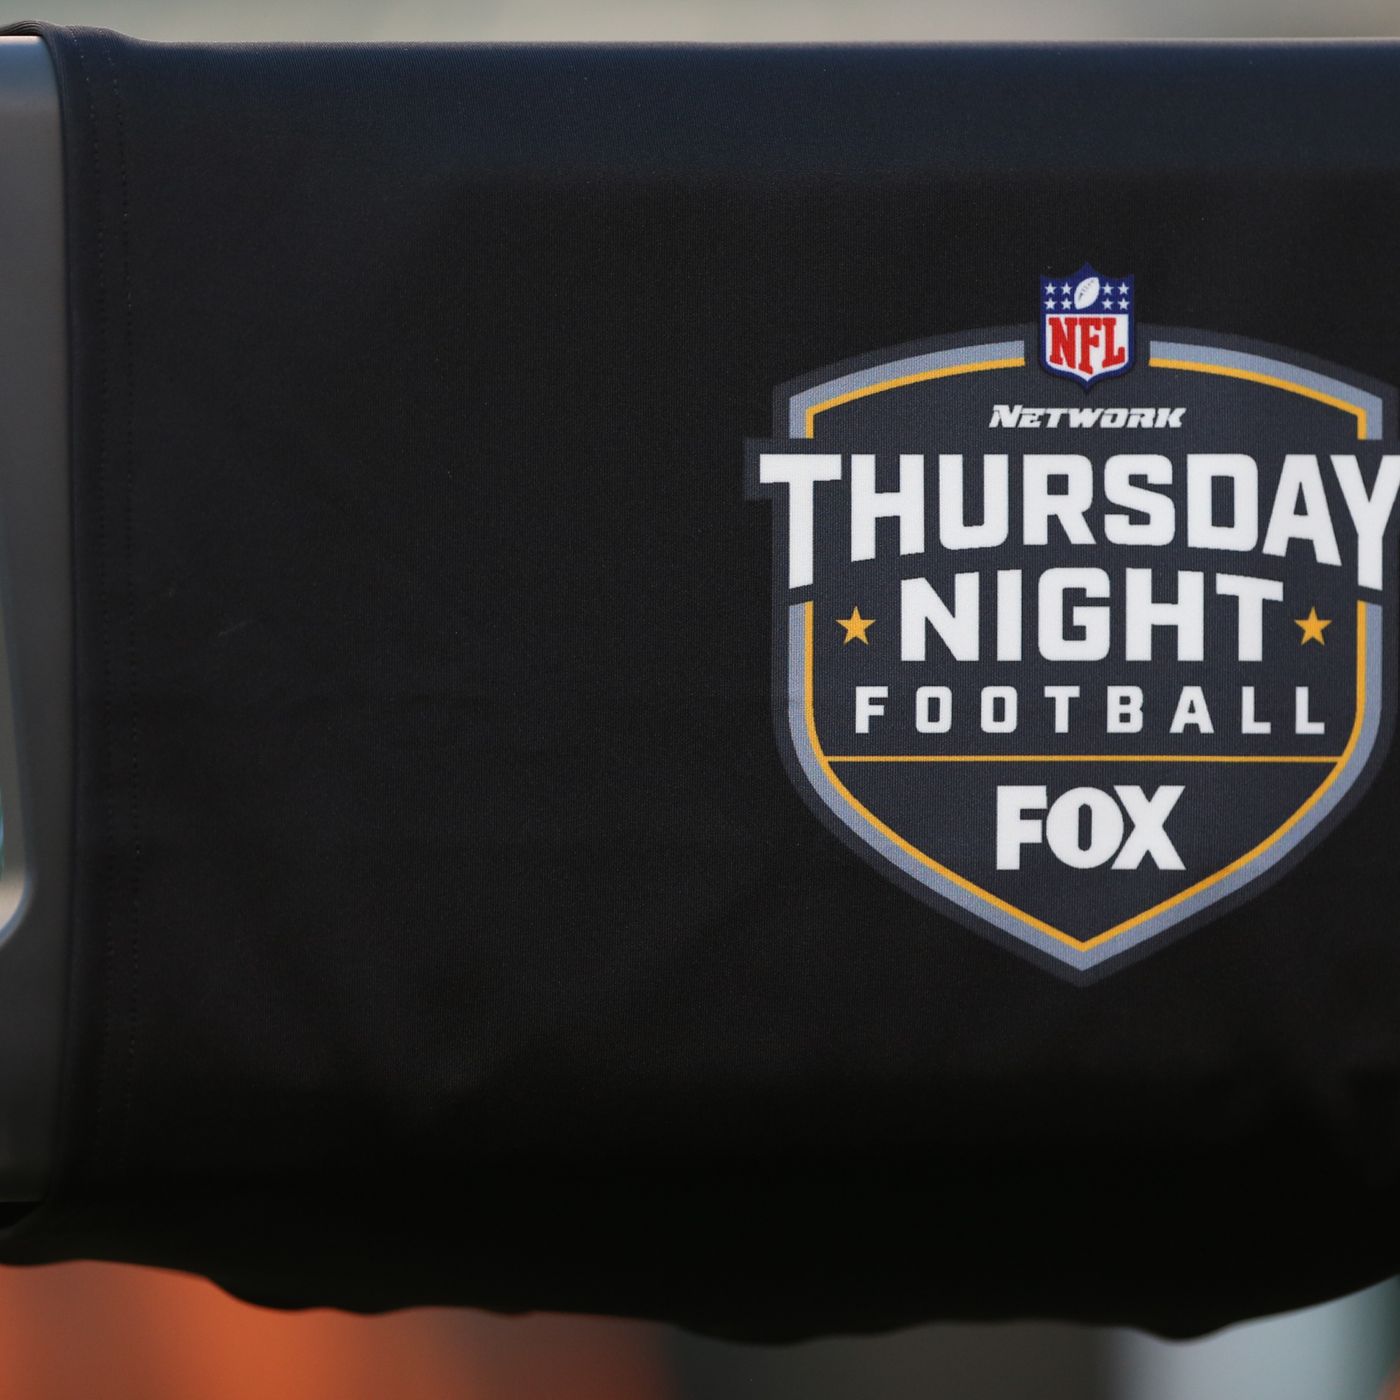 NFL Schedule 2022: Full list of Thursday Night Football games